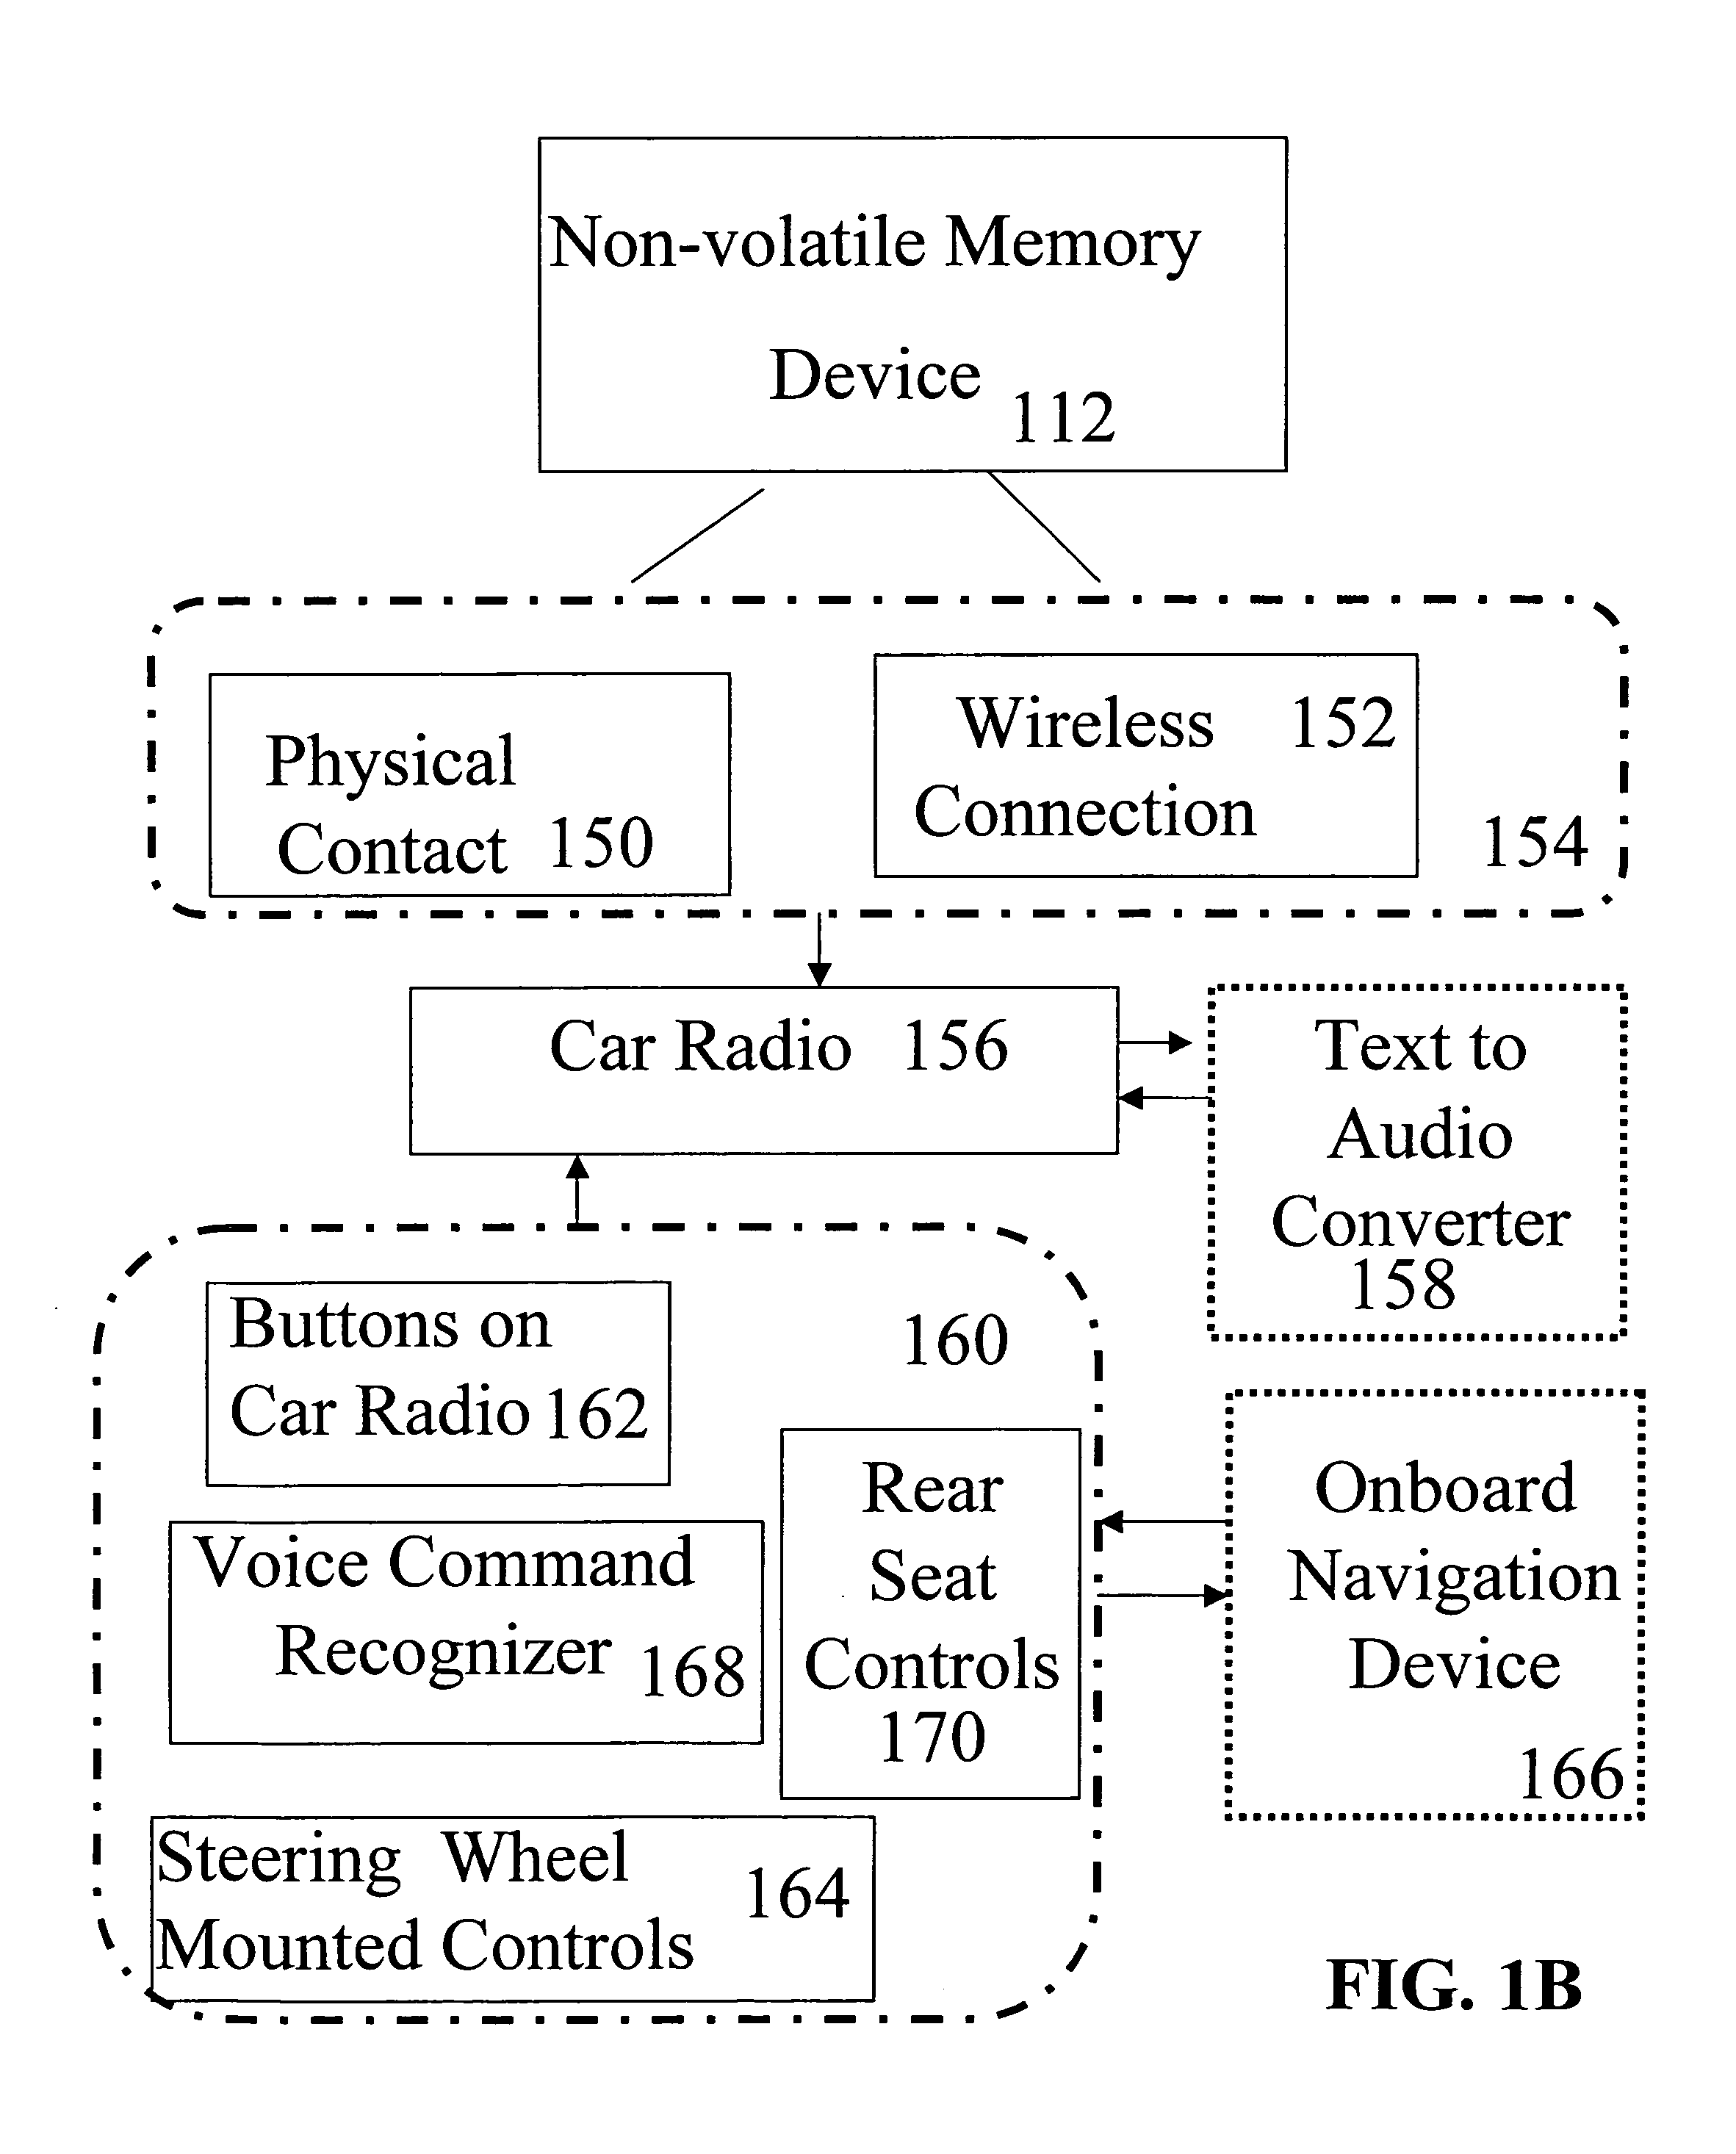 Playback of downloaded digital audio content on car radios